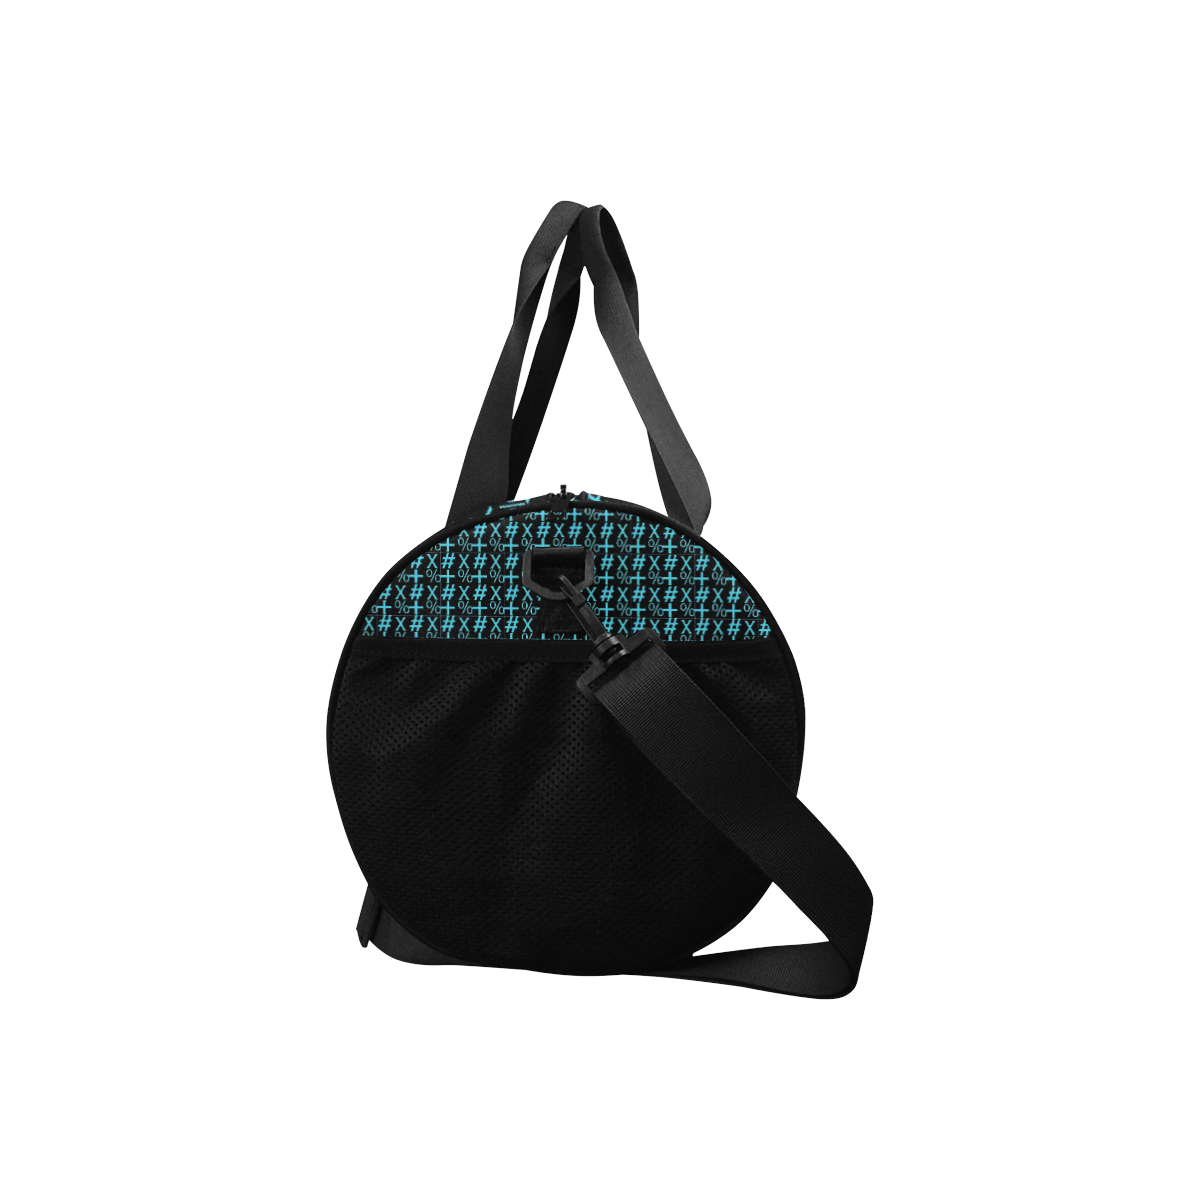 NUMBERS Collection Symbols Teal/ Black Duffle Bag (Model 1679)